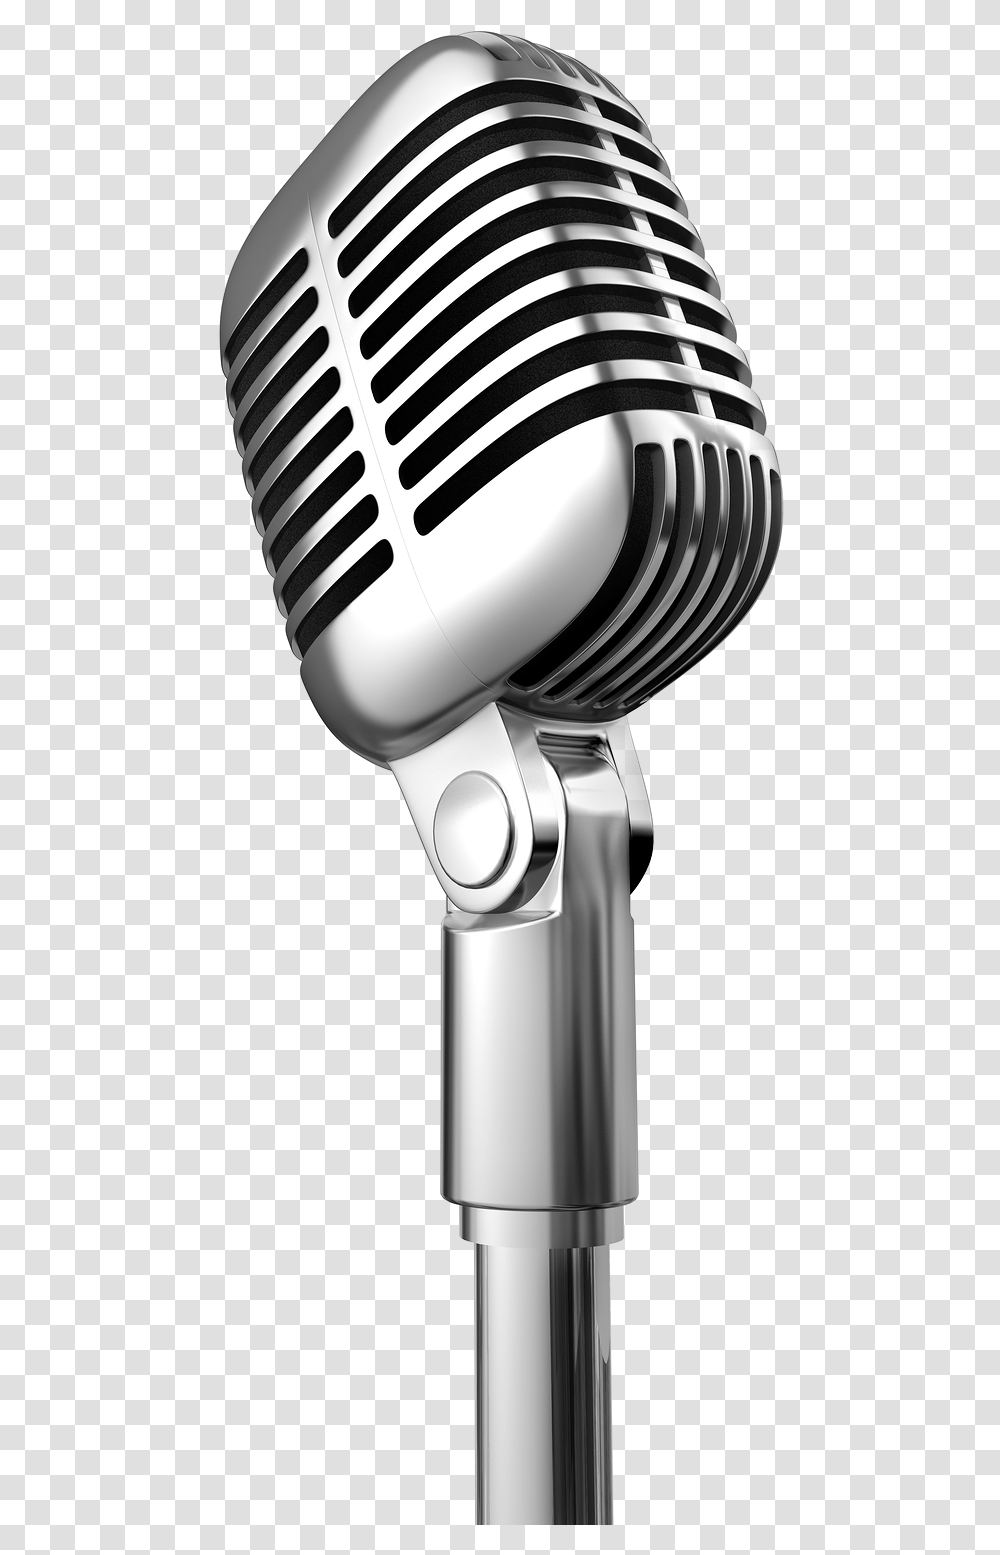 Microphone Image Microphone, Electrical Device, Blow Dryer, Appliance, Hair Drier Transparent Png